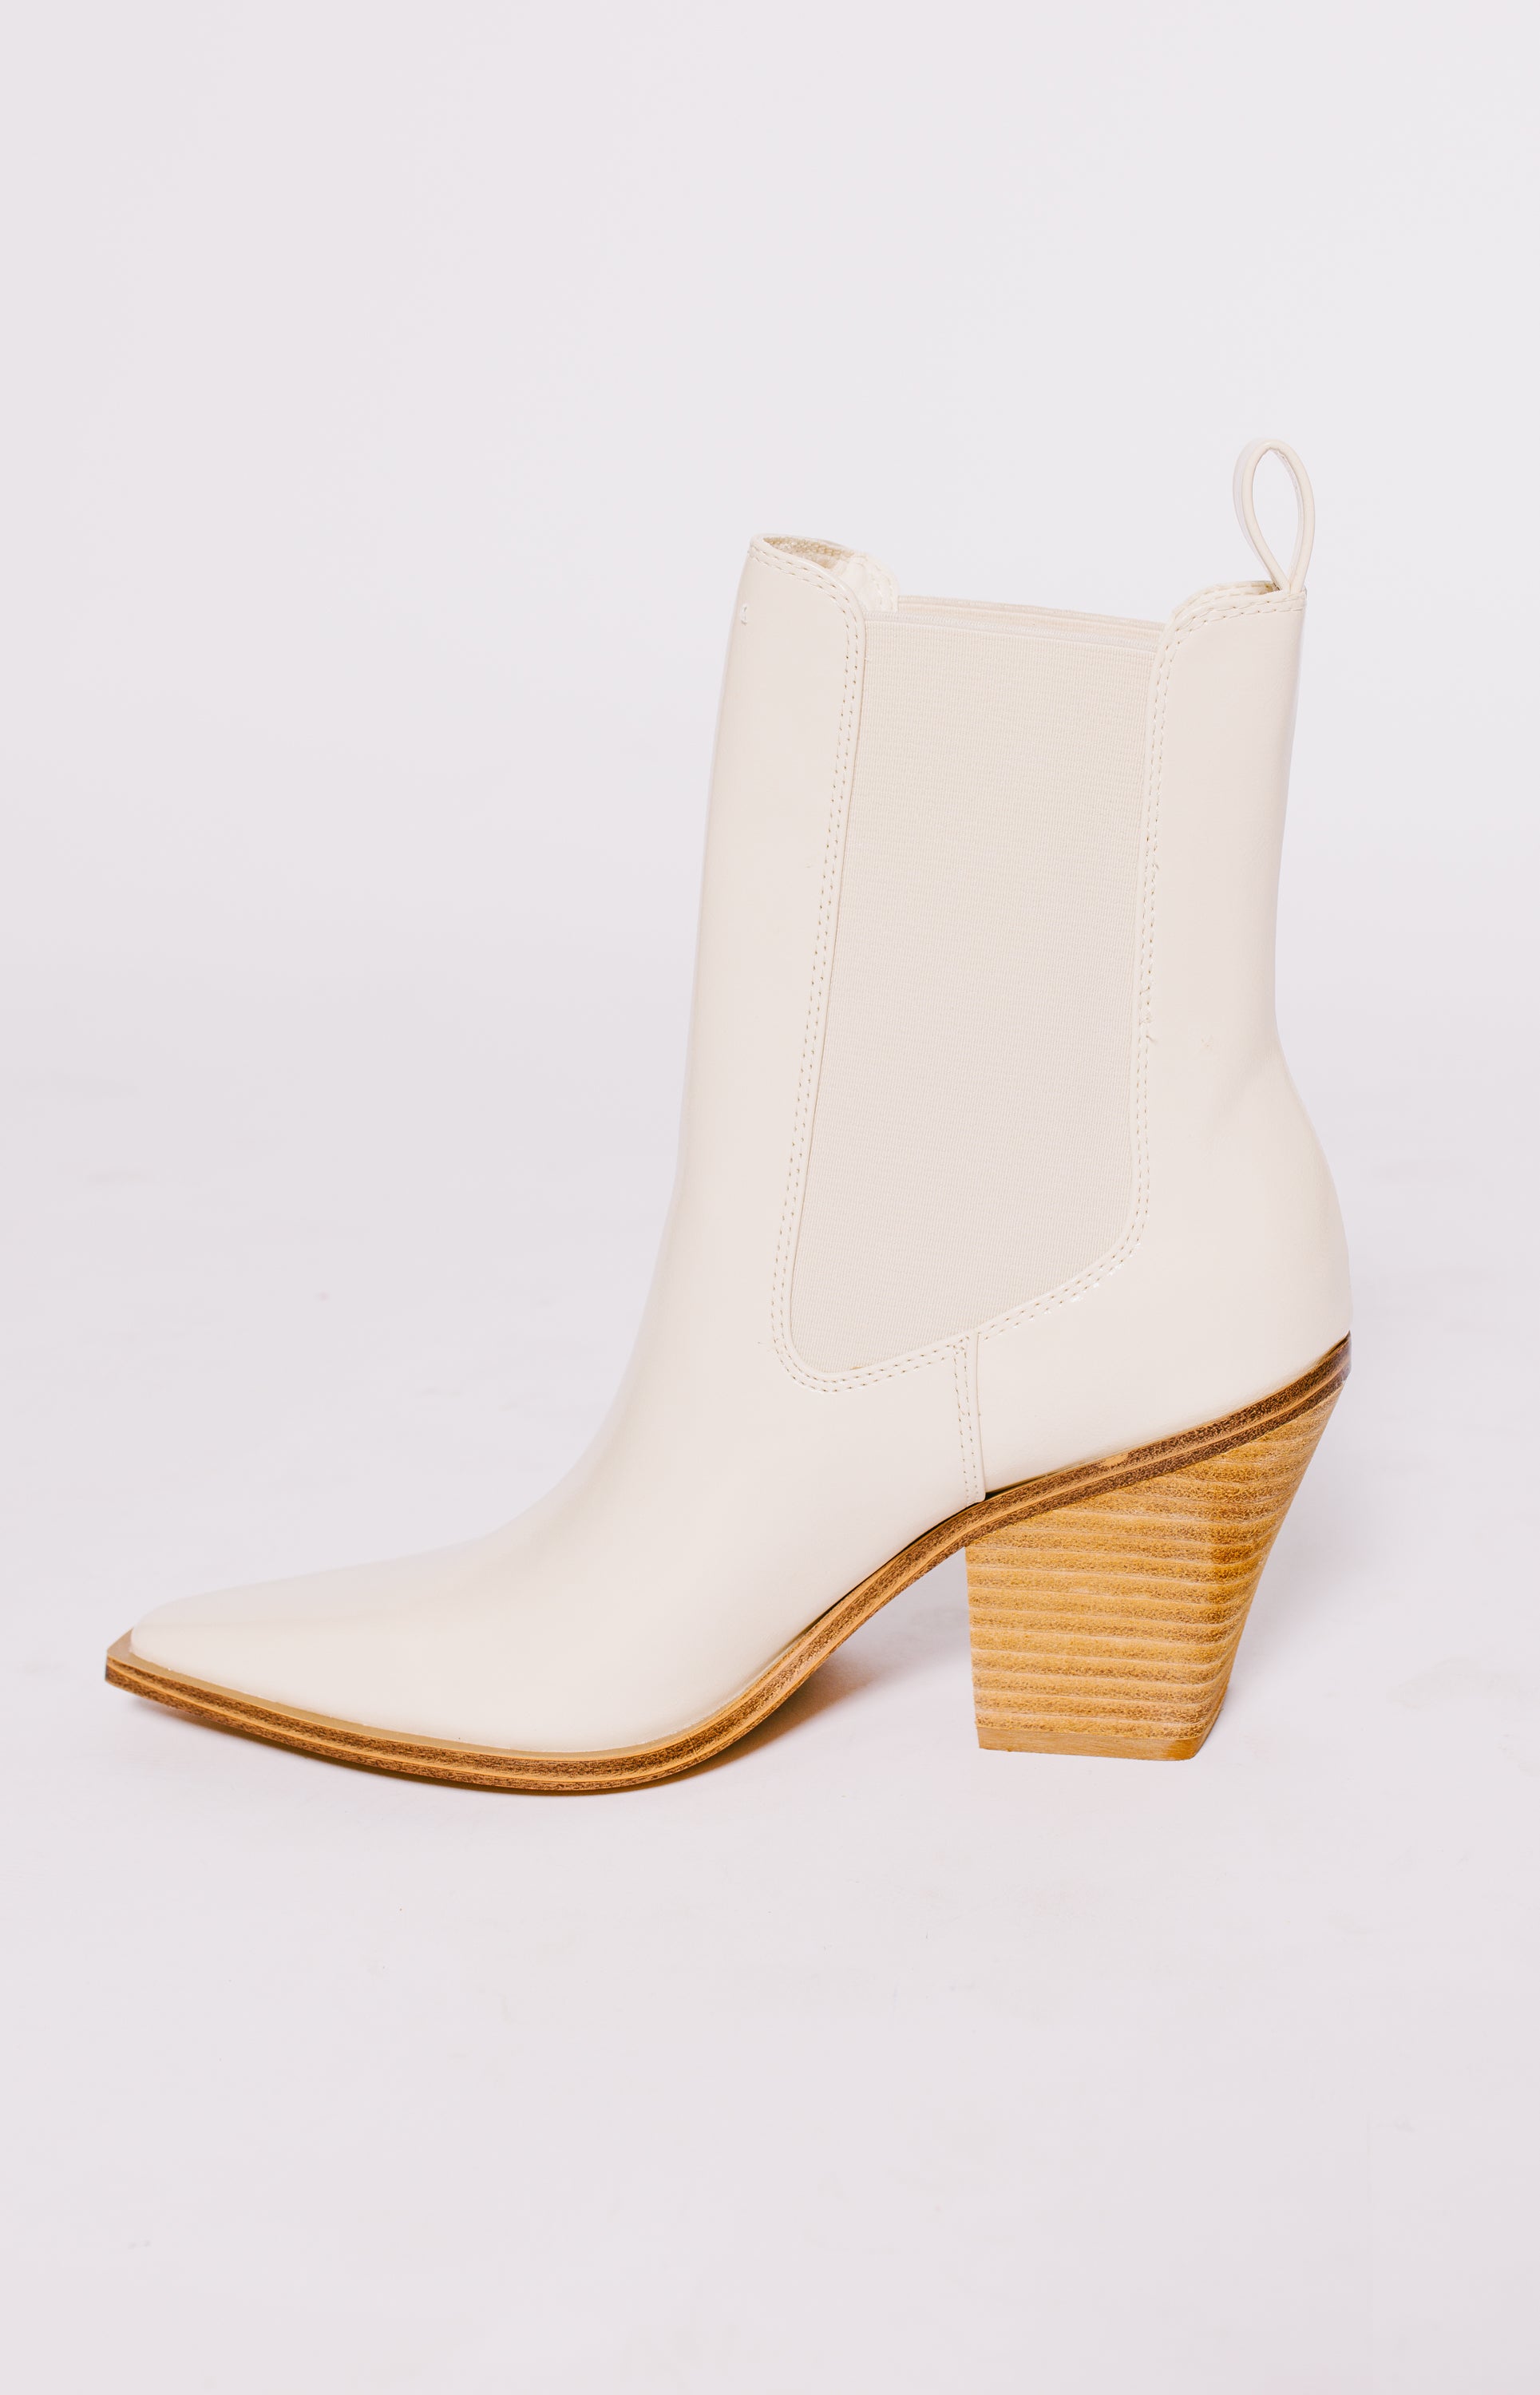 Chinese Laundry: Tevin Dress Bootie